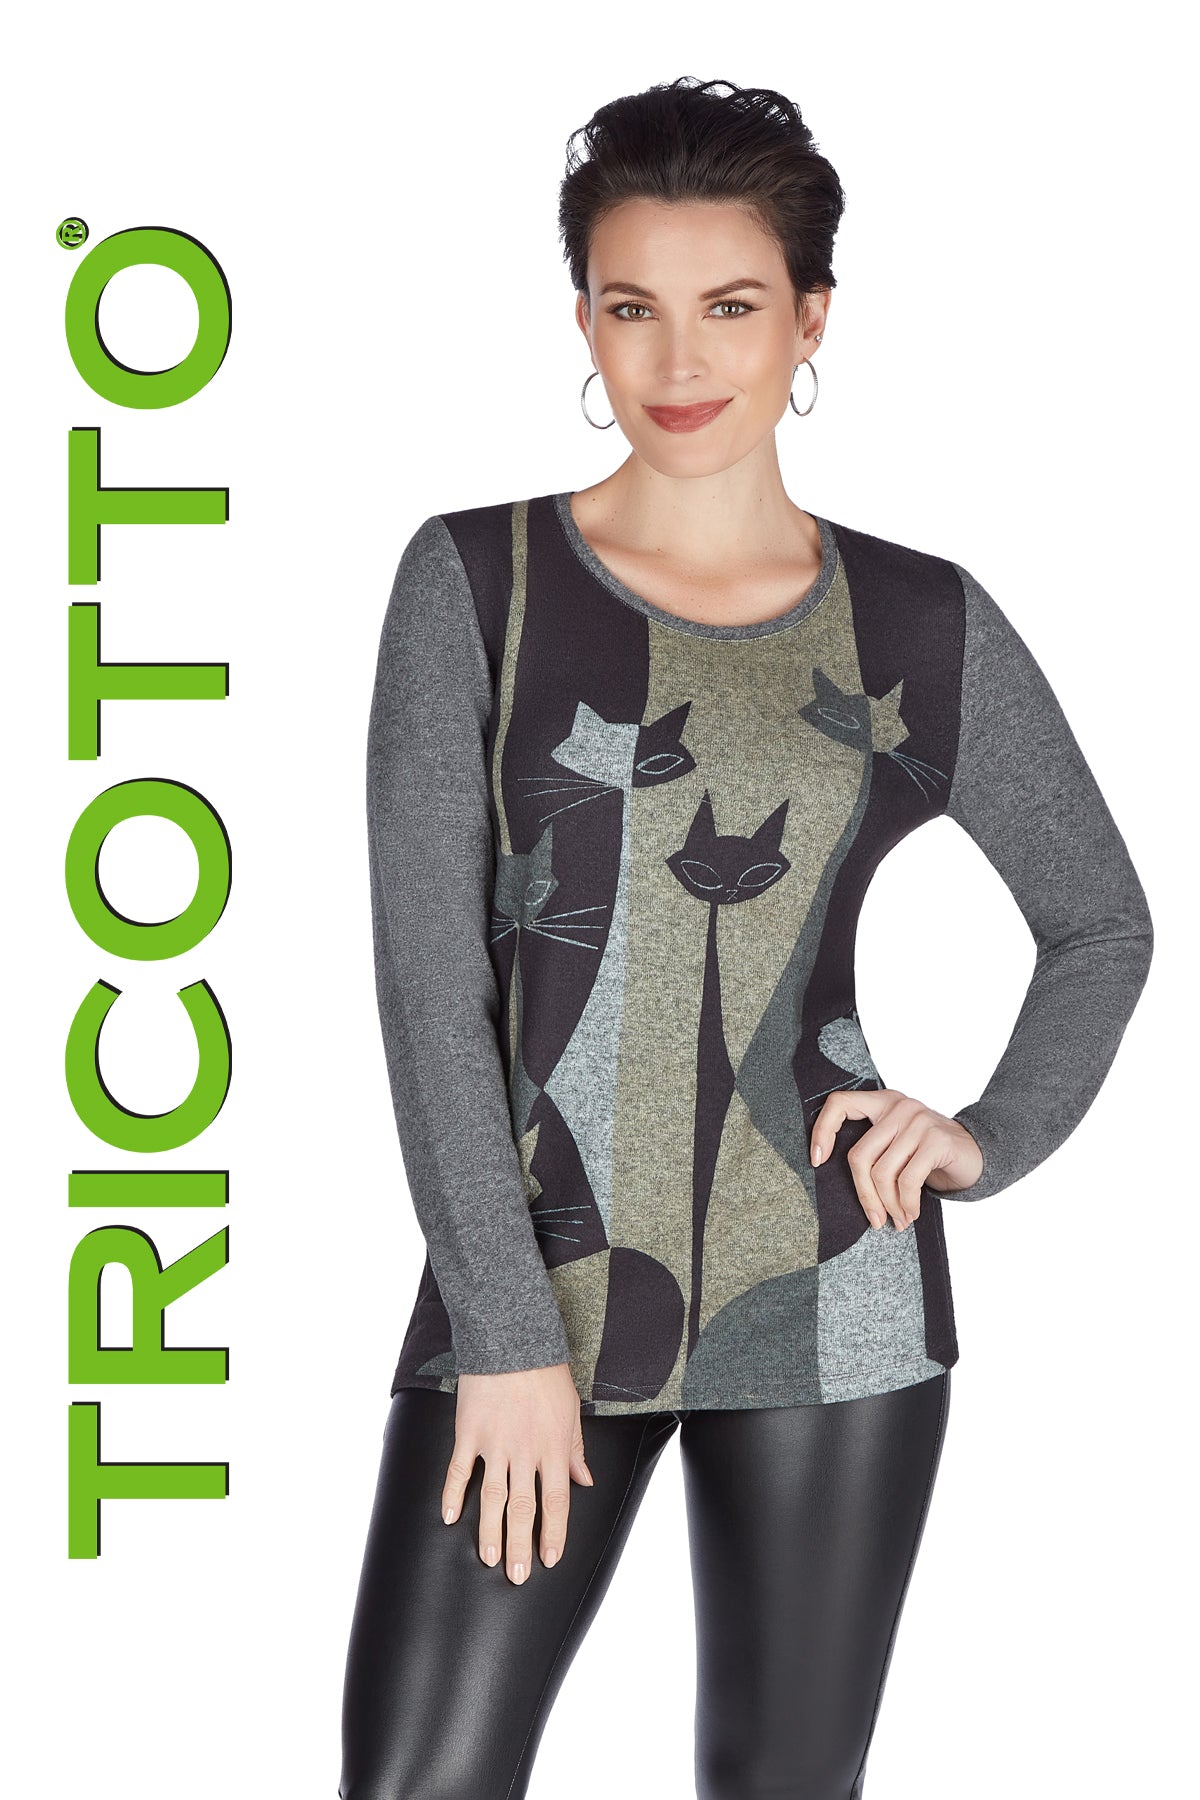 Tricotto Online Sweater Shop-Tricotto Sweaters-Buy Tricotto Sweaters Online-Tricotto Fashion Montreal